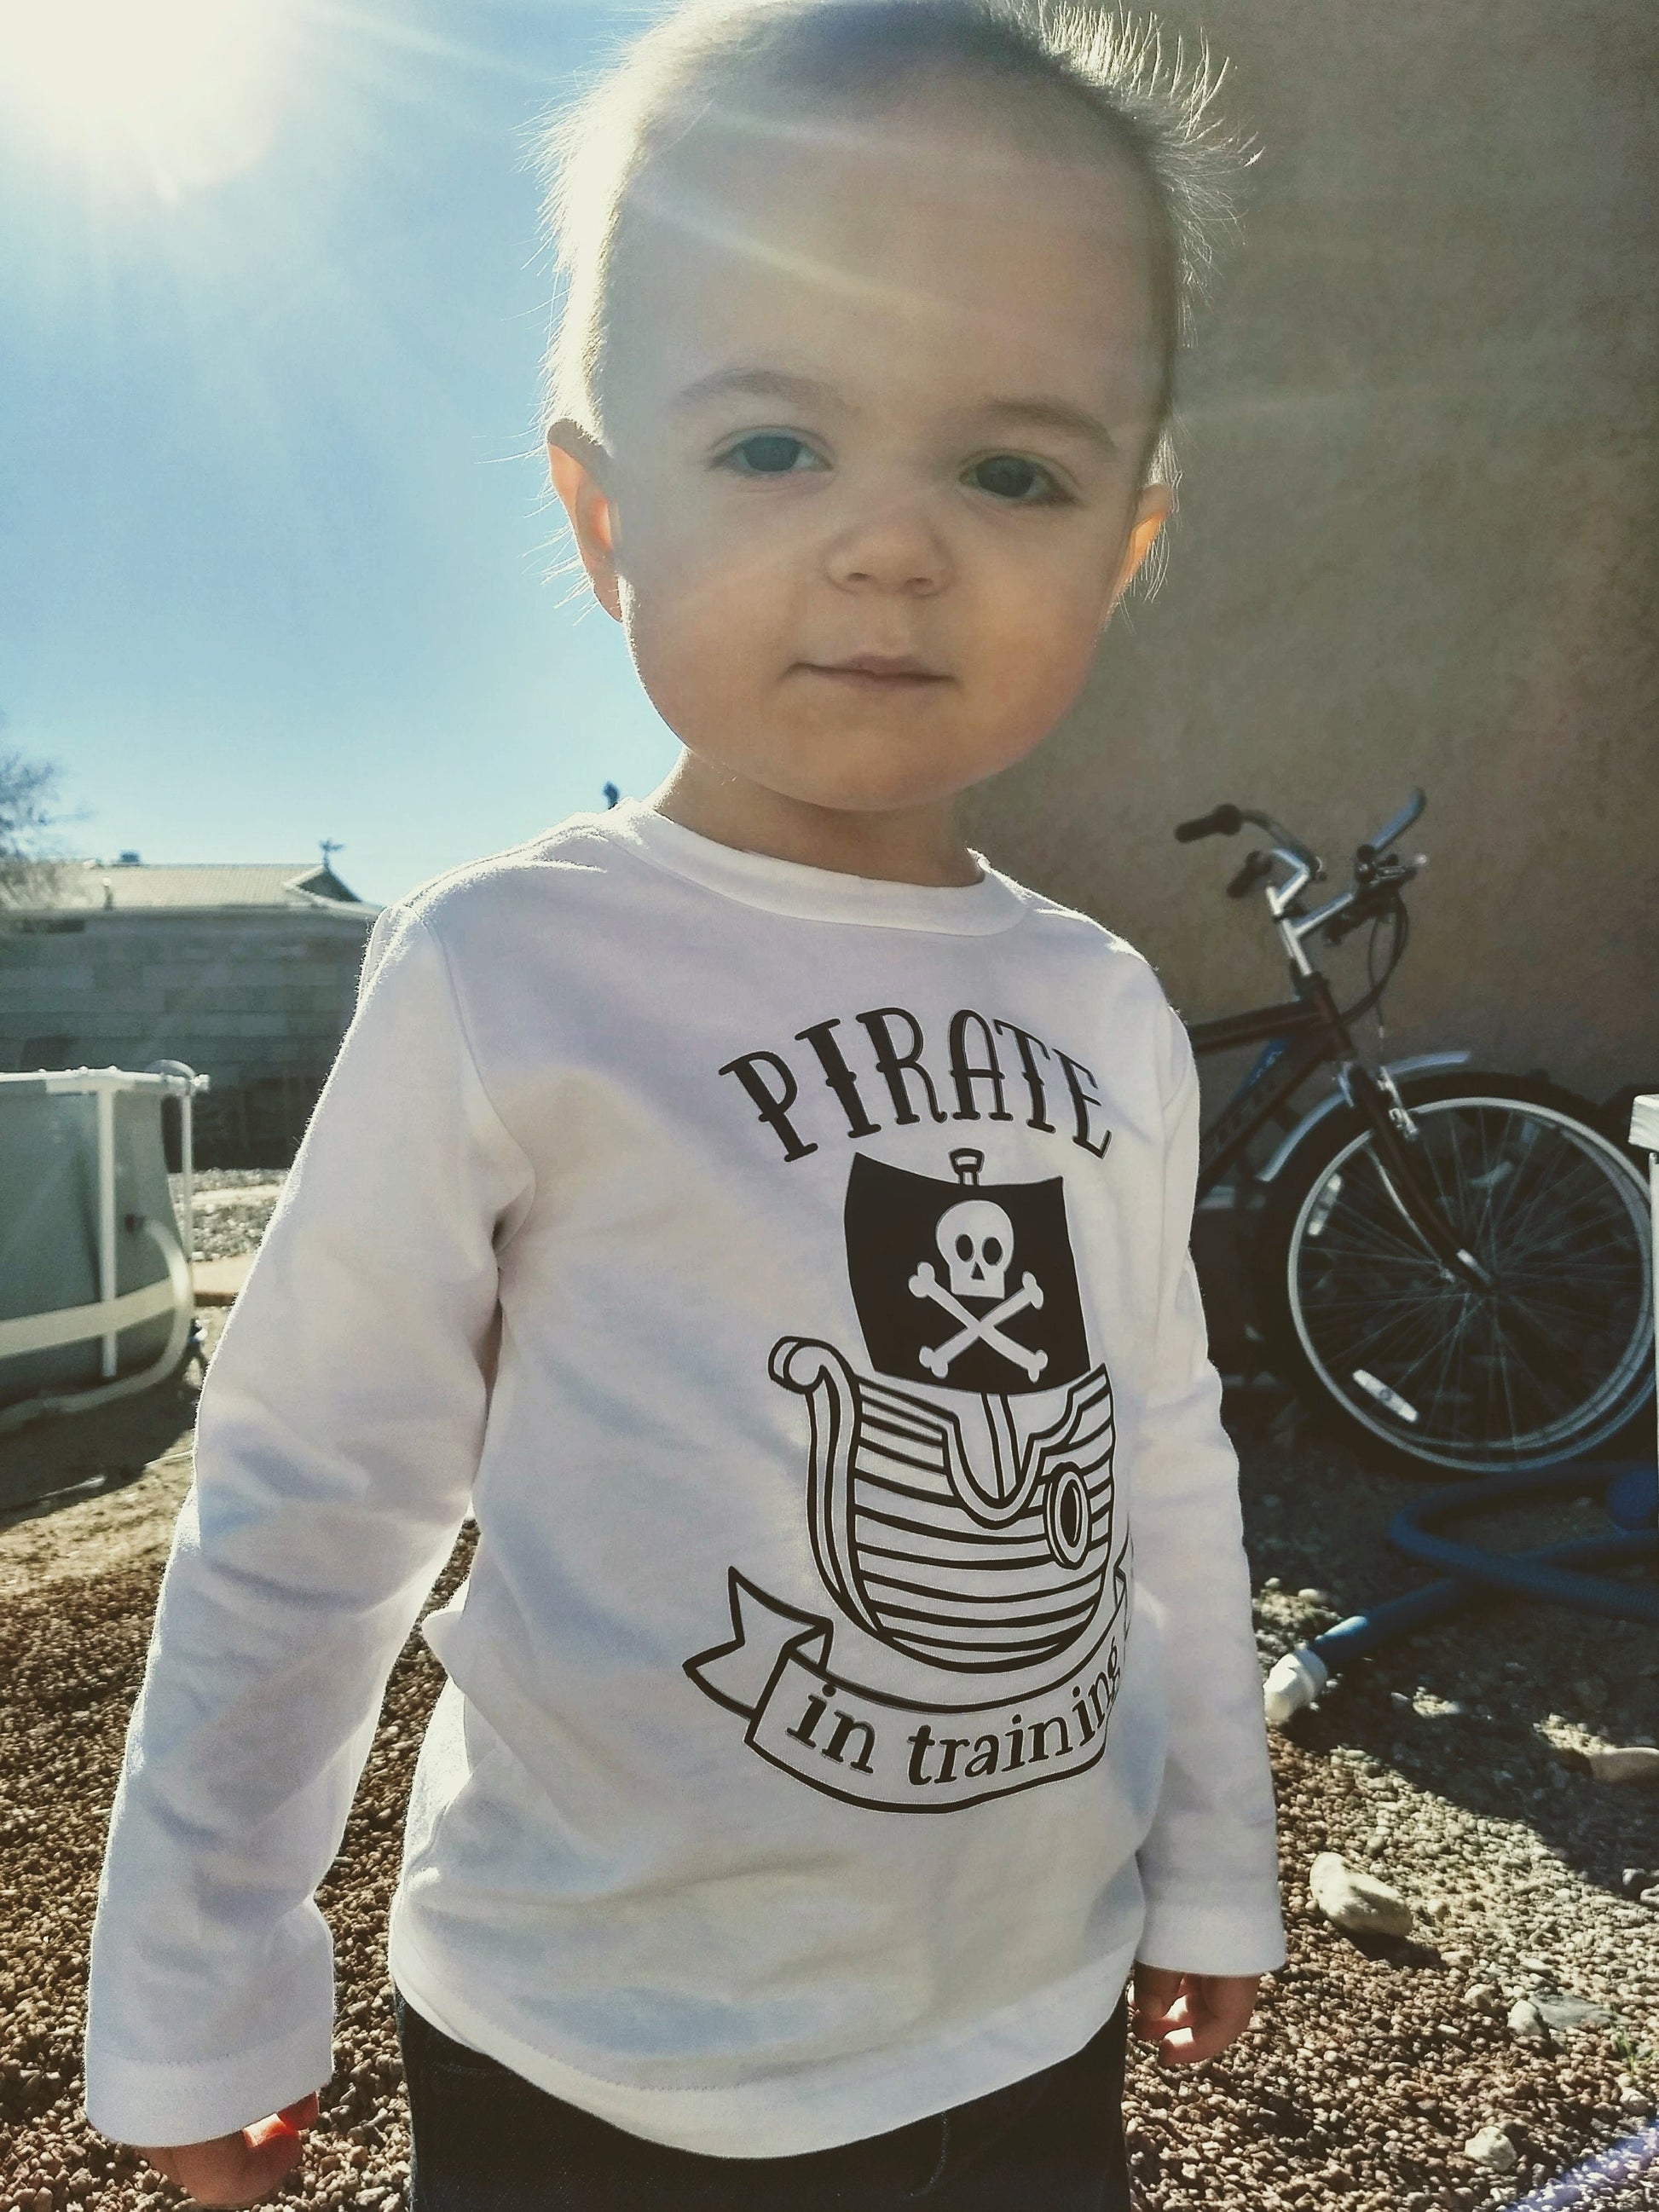 Pirate in Training Infant or Toddler Shirt or Bodysuit - Cute Toddler Shirt - pirate birthday shirt - pirate party shirt - toddler boy shirt